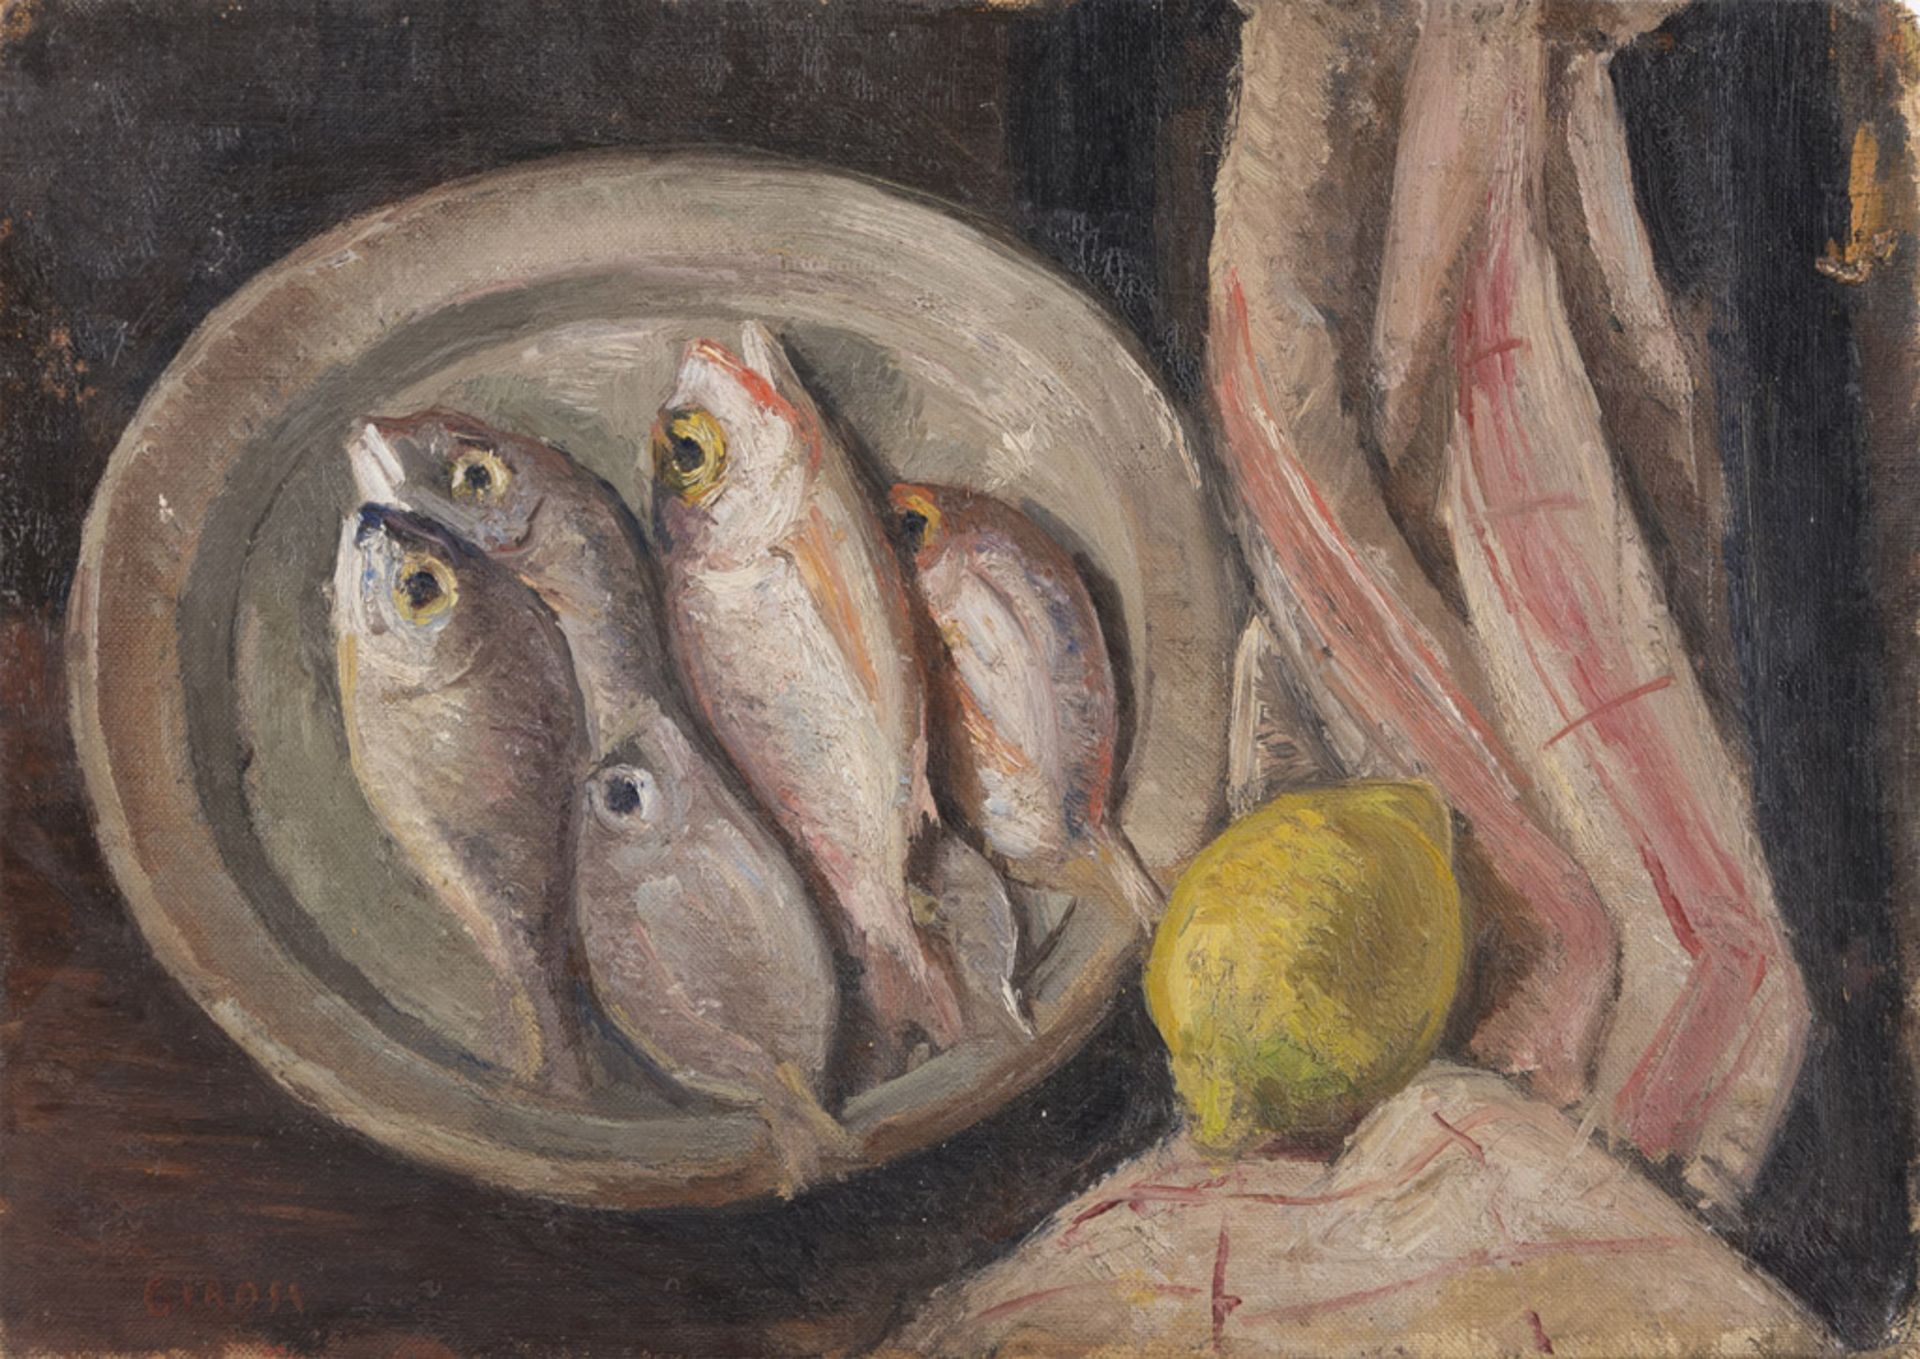 FRANK GIROSI (Naples 1896 - 1987) Composition with fishes and lemon, 1940 ca. Oil on canvas